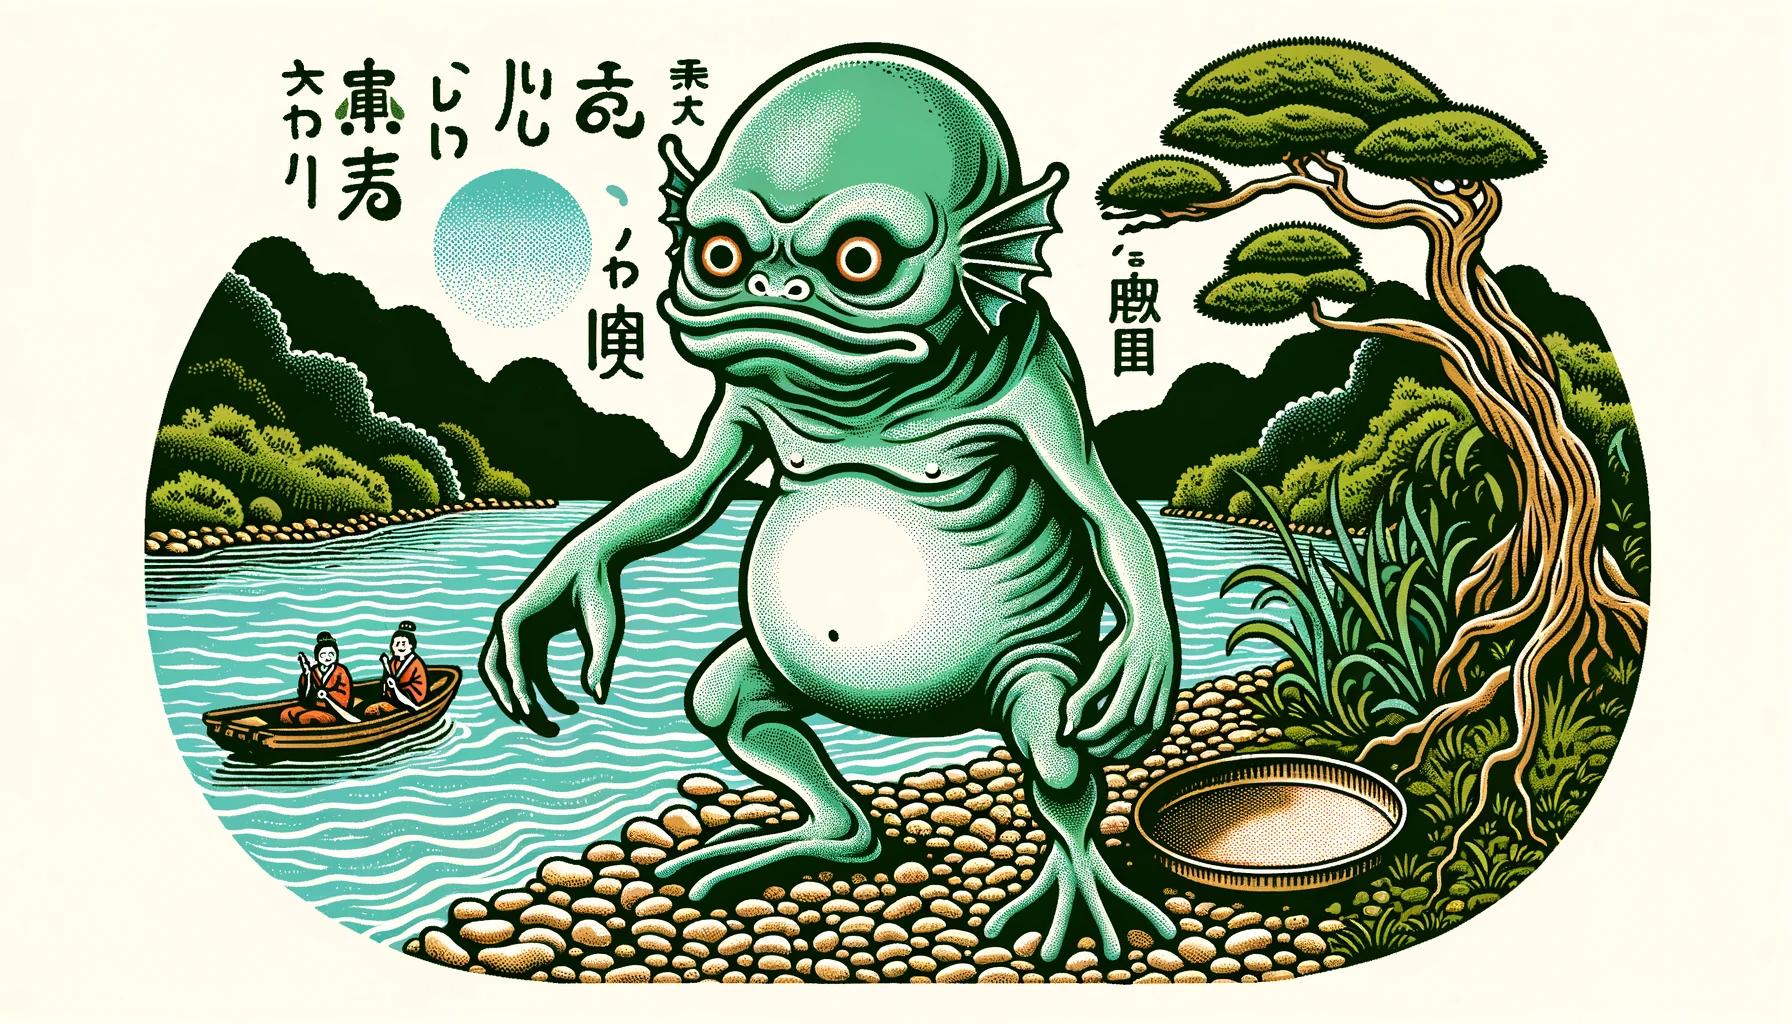 Japanese Kappa Monster: A Fascinating Creature from Japanese Folklore